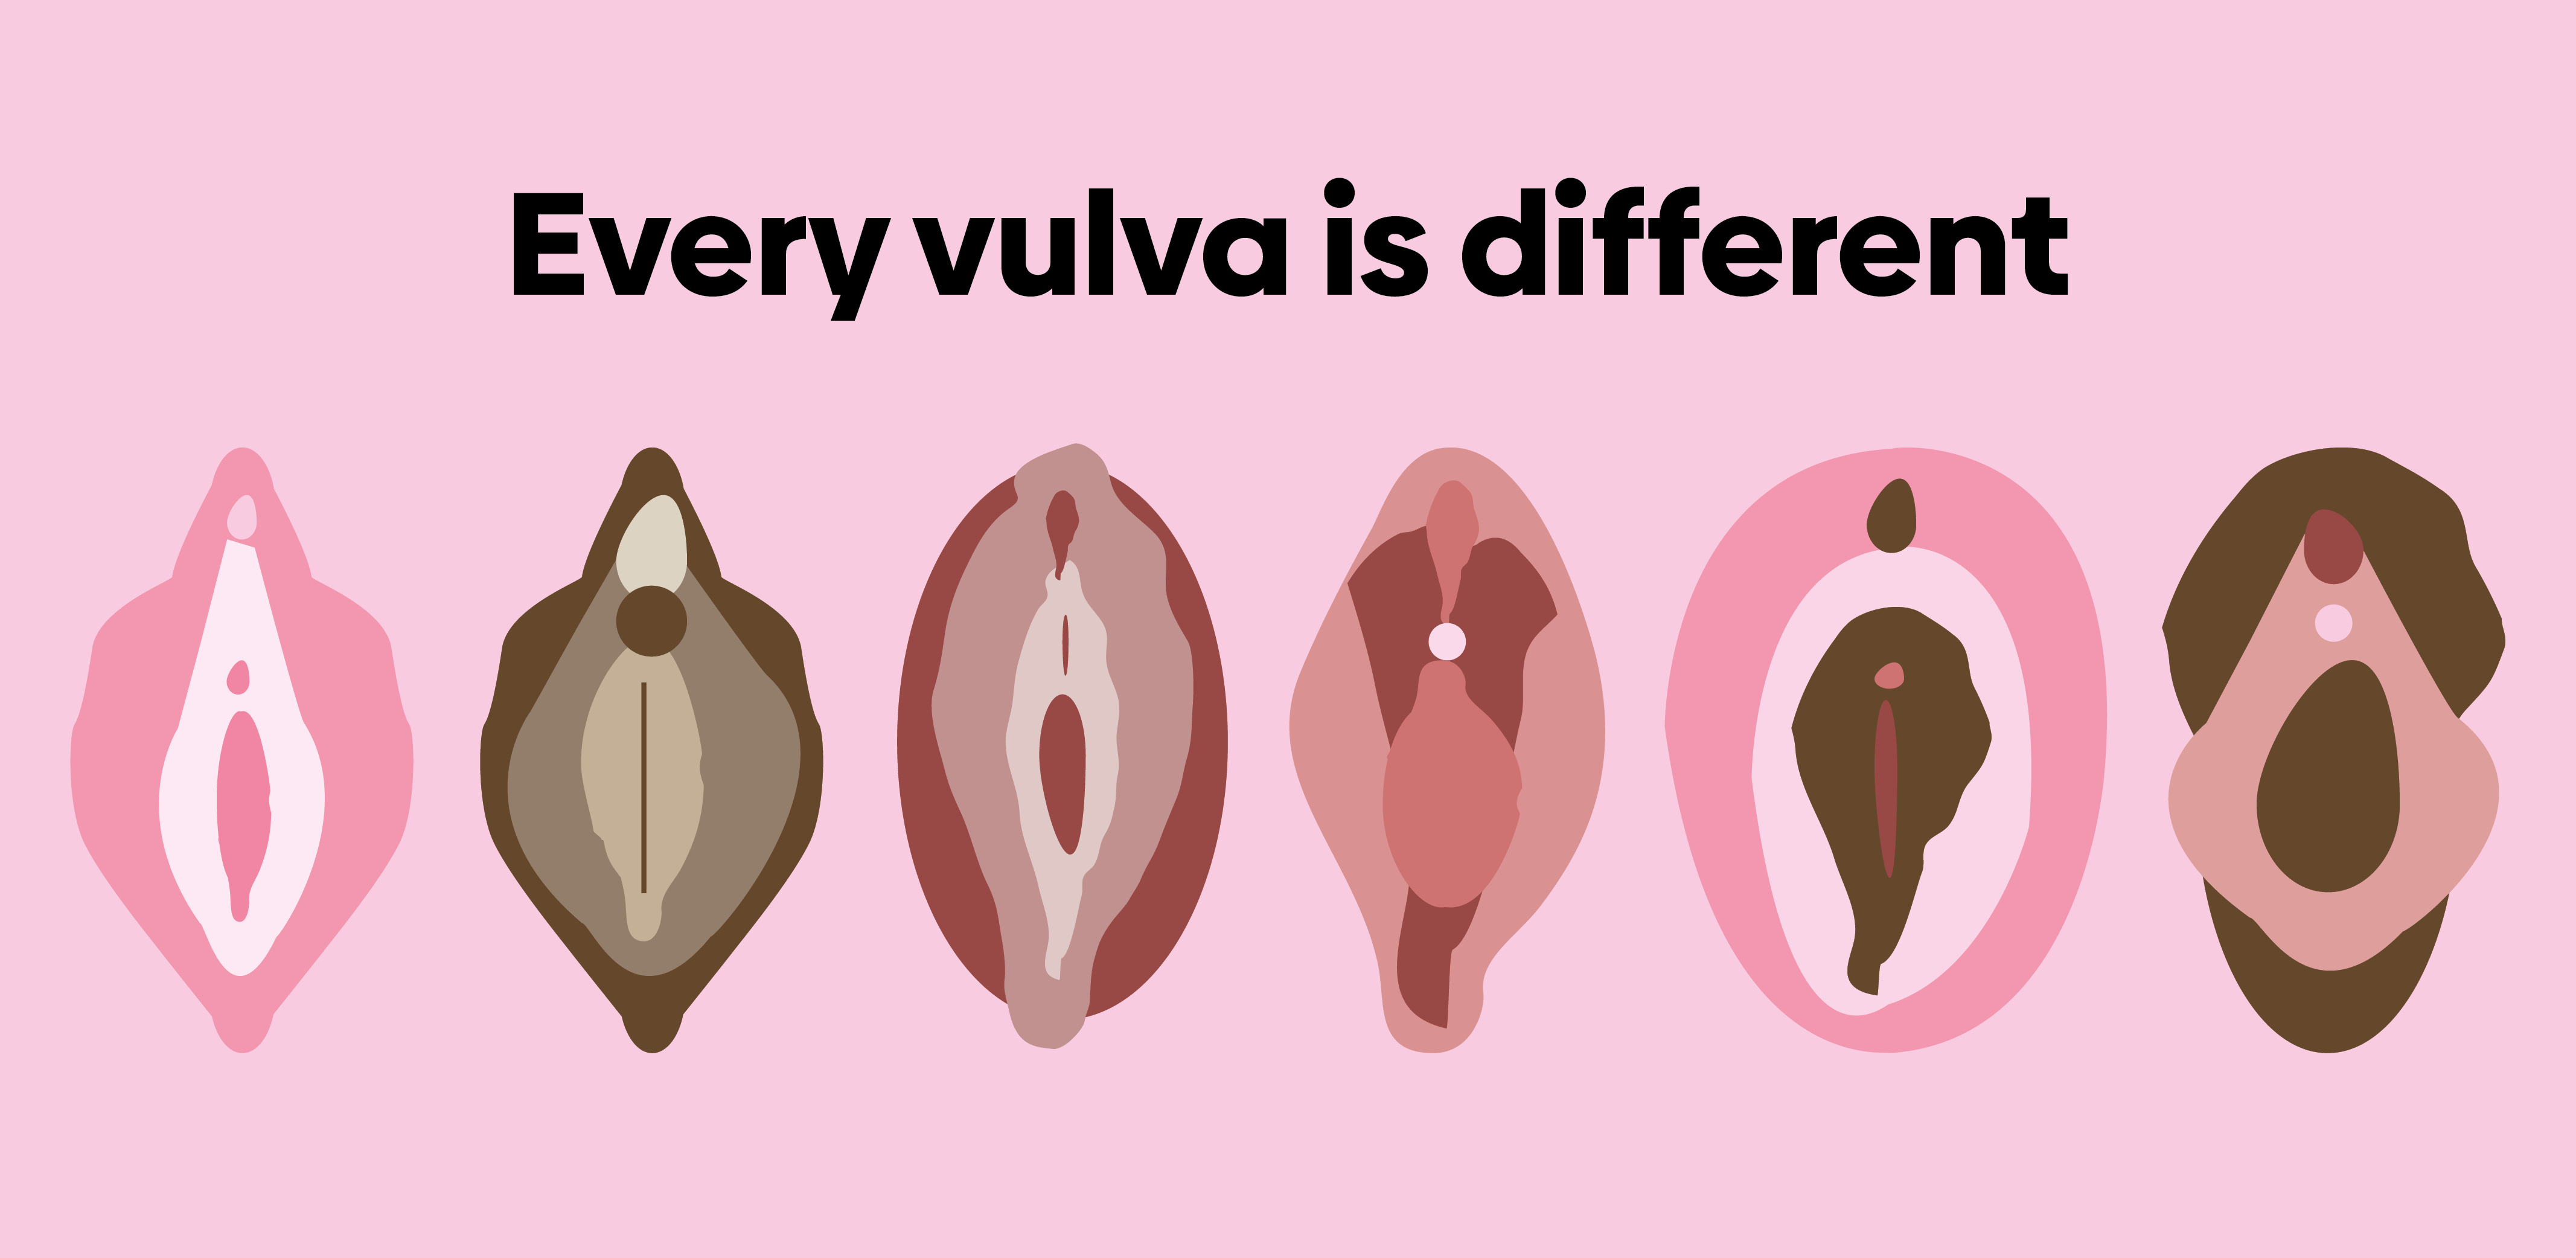 Vaginal Odor: What's Normal and What's Not